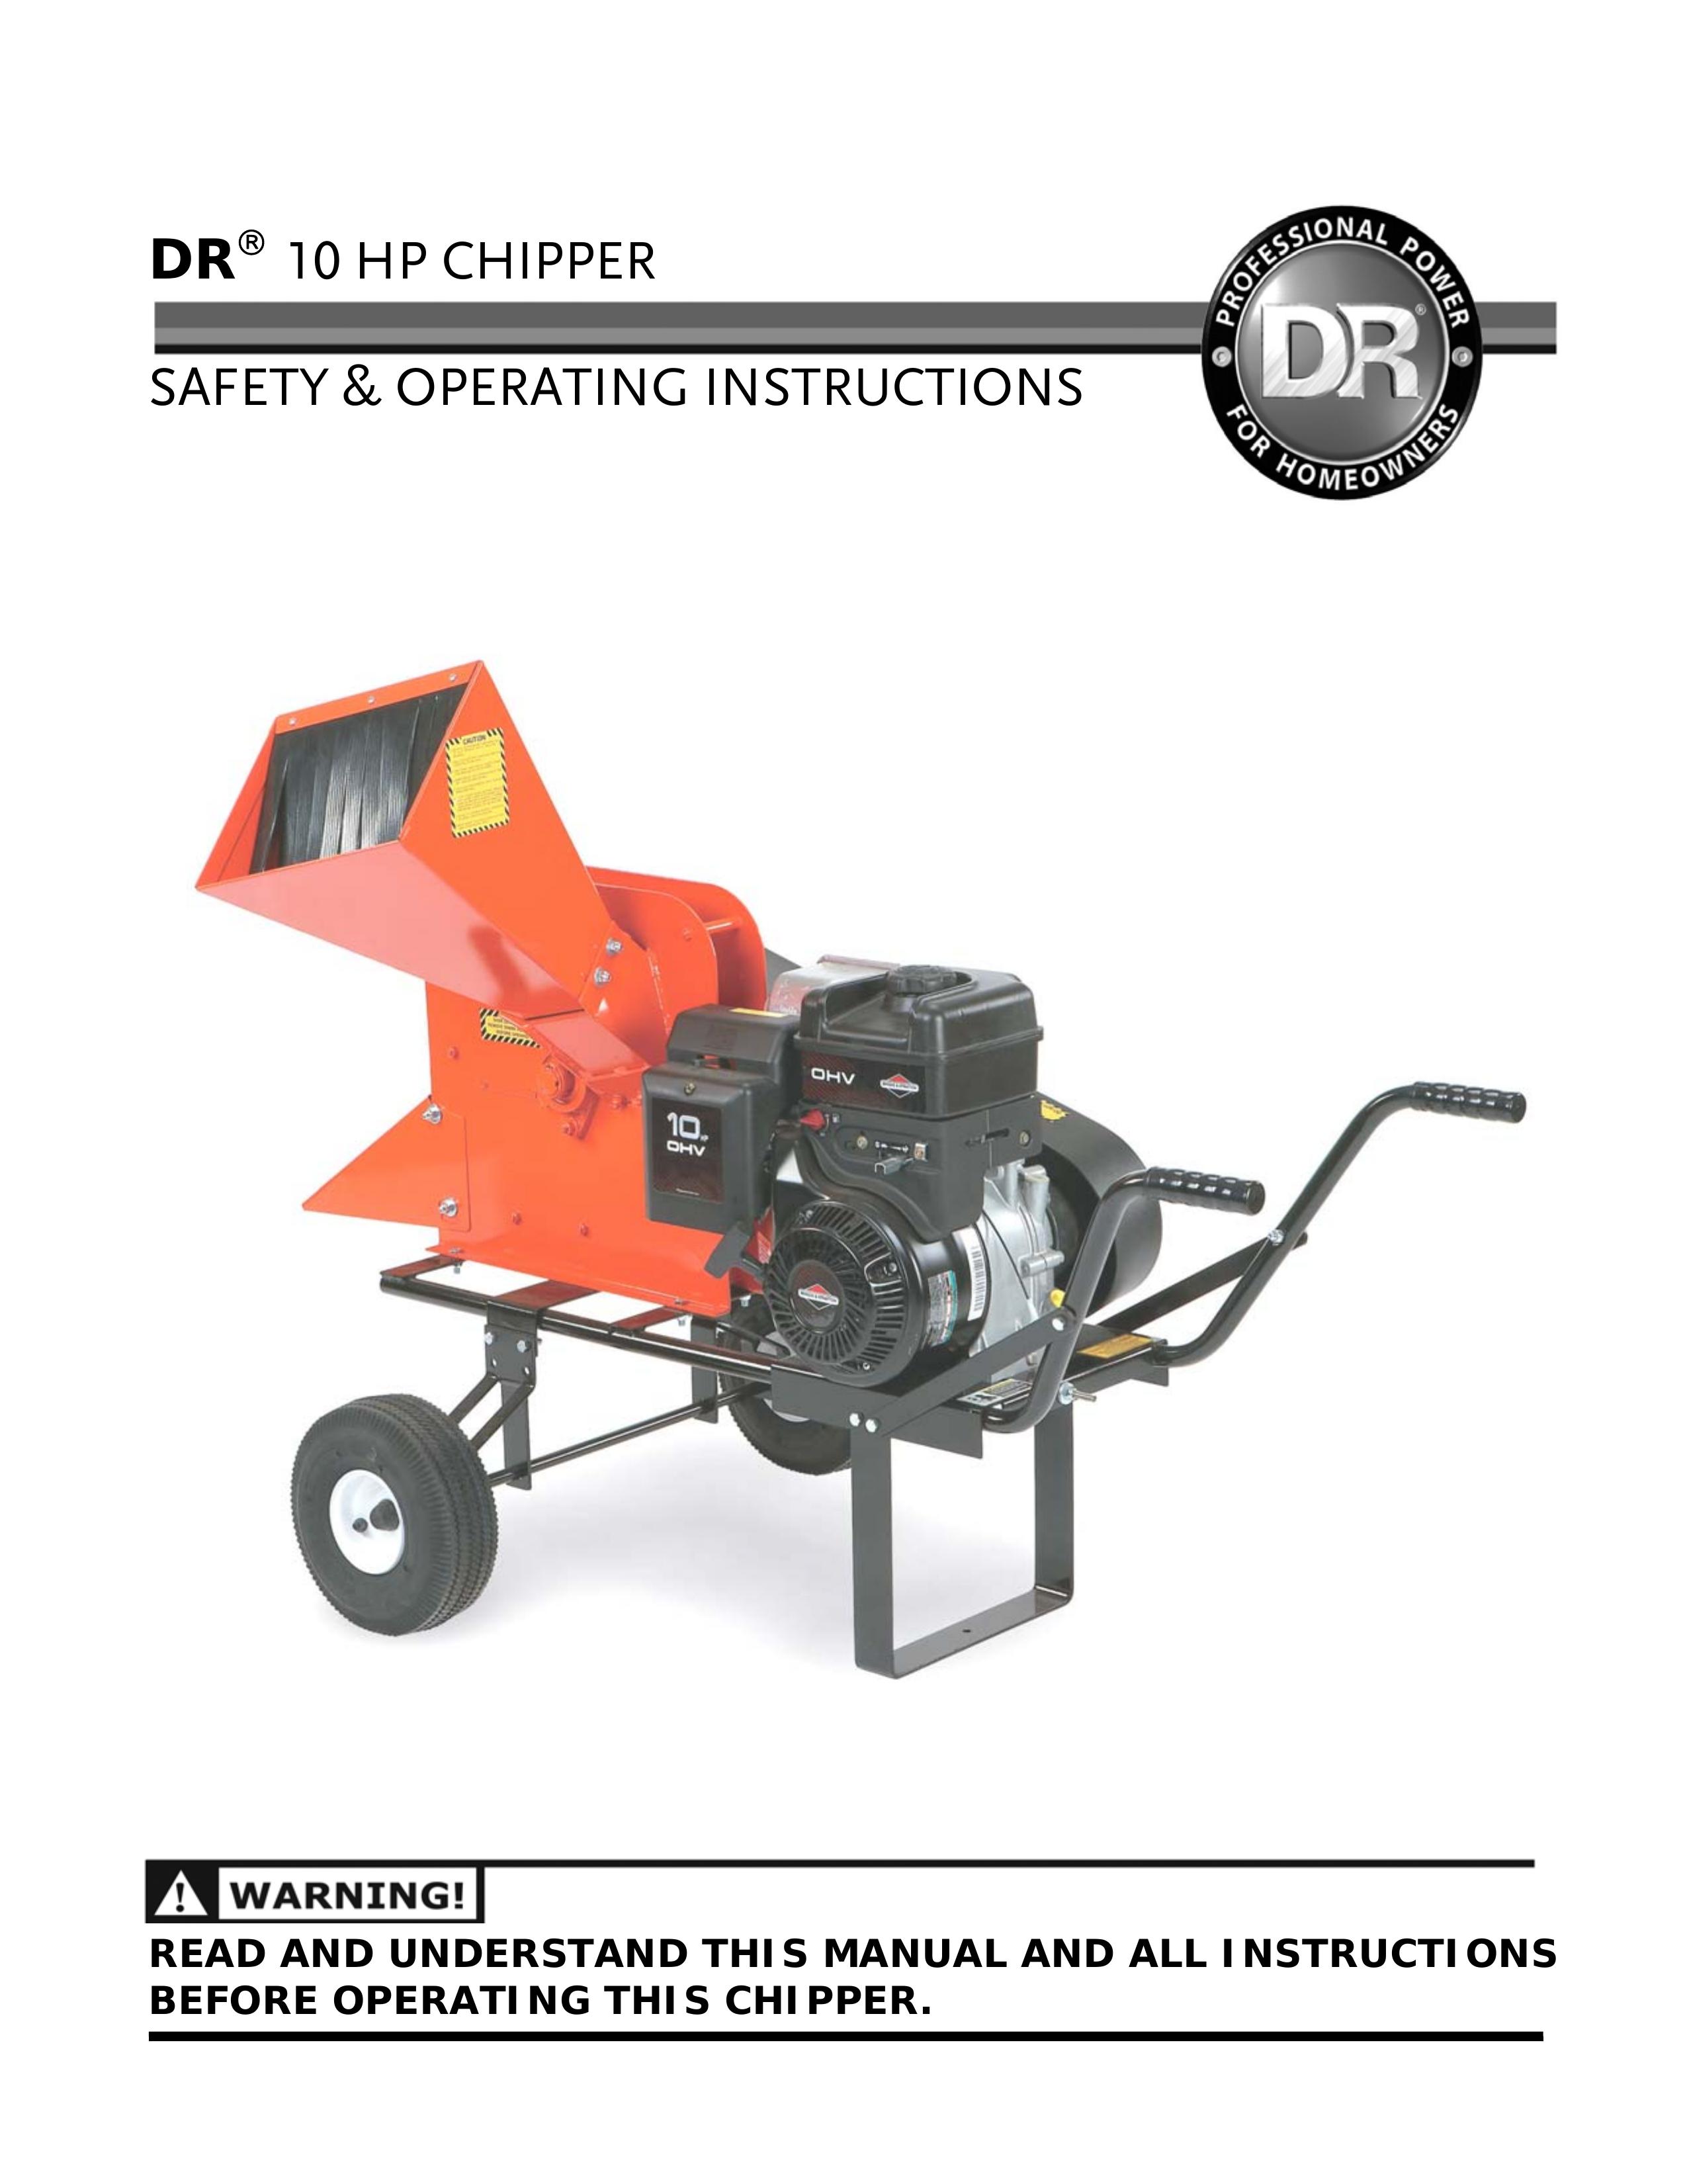 Country Home Products 10 HP Chipper User Manual